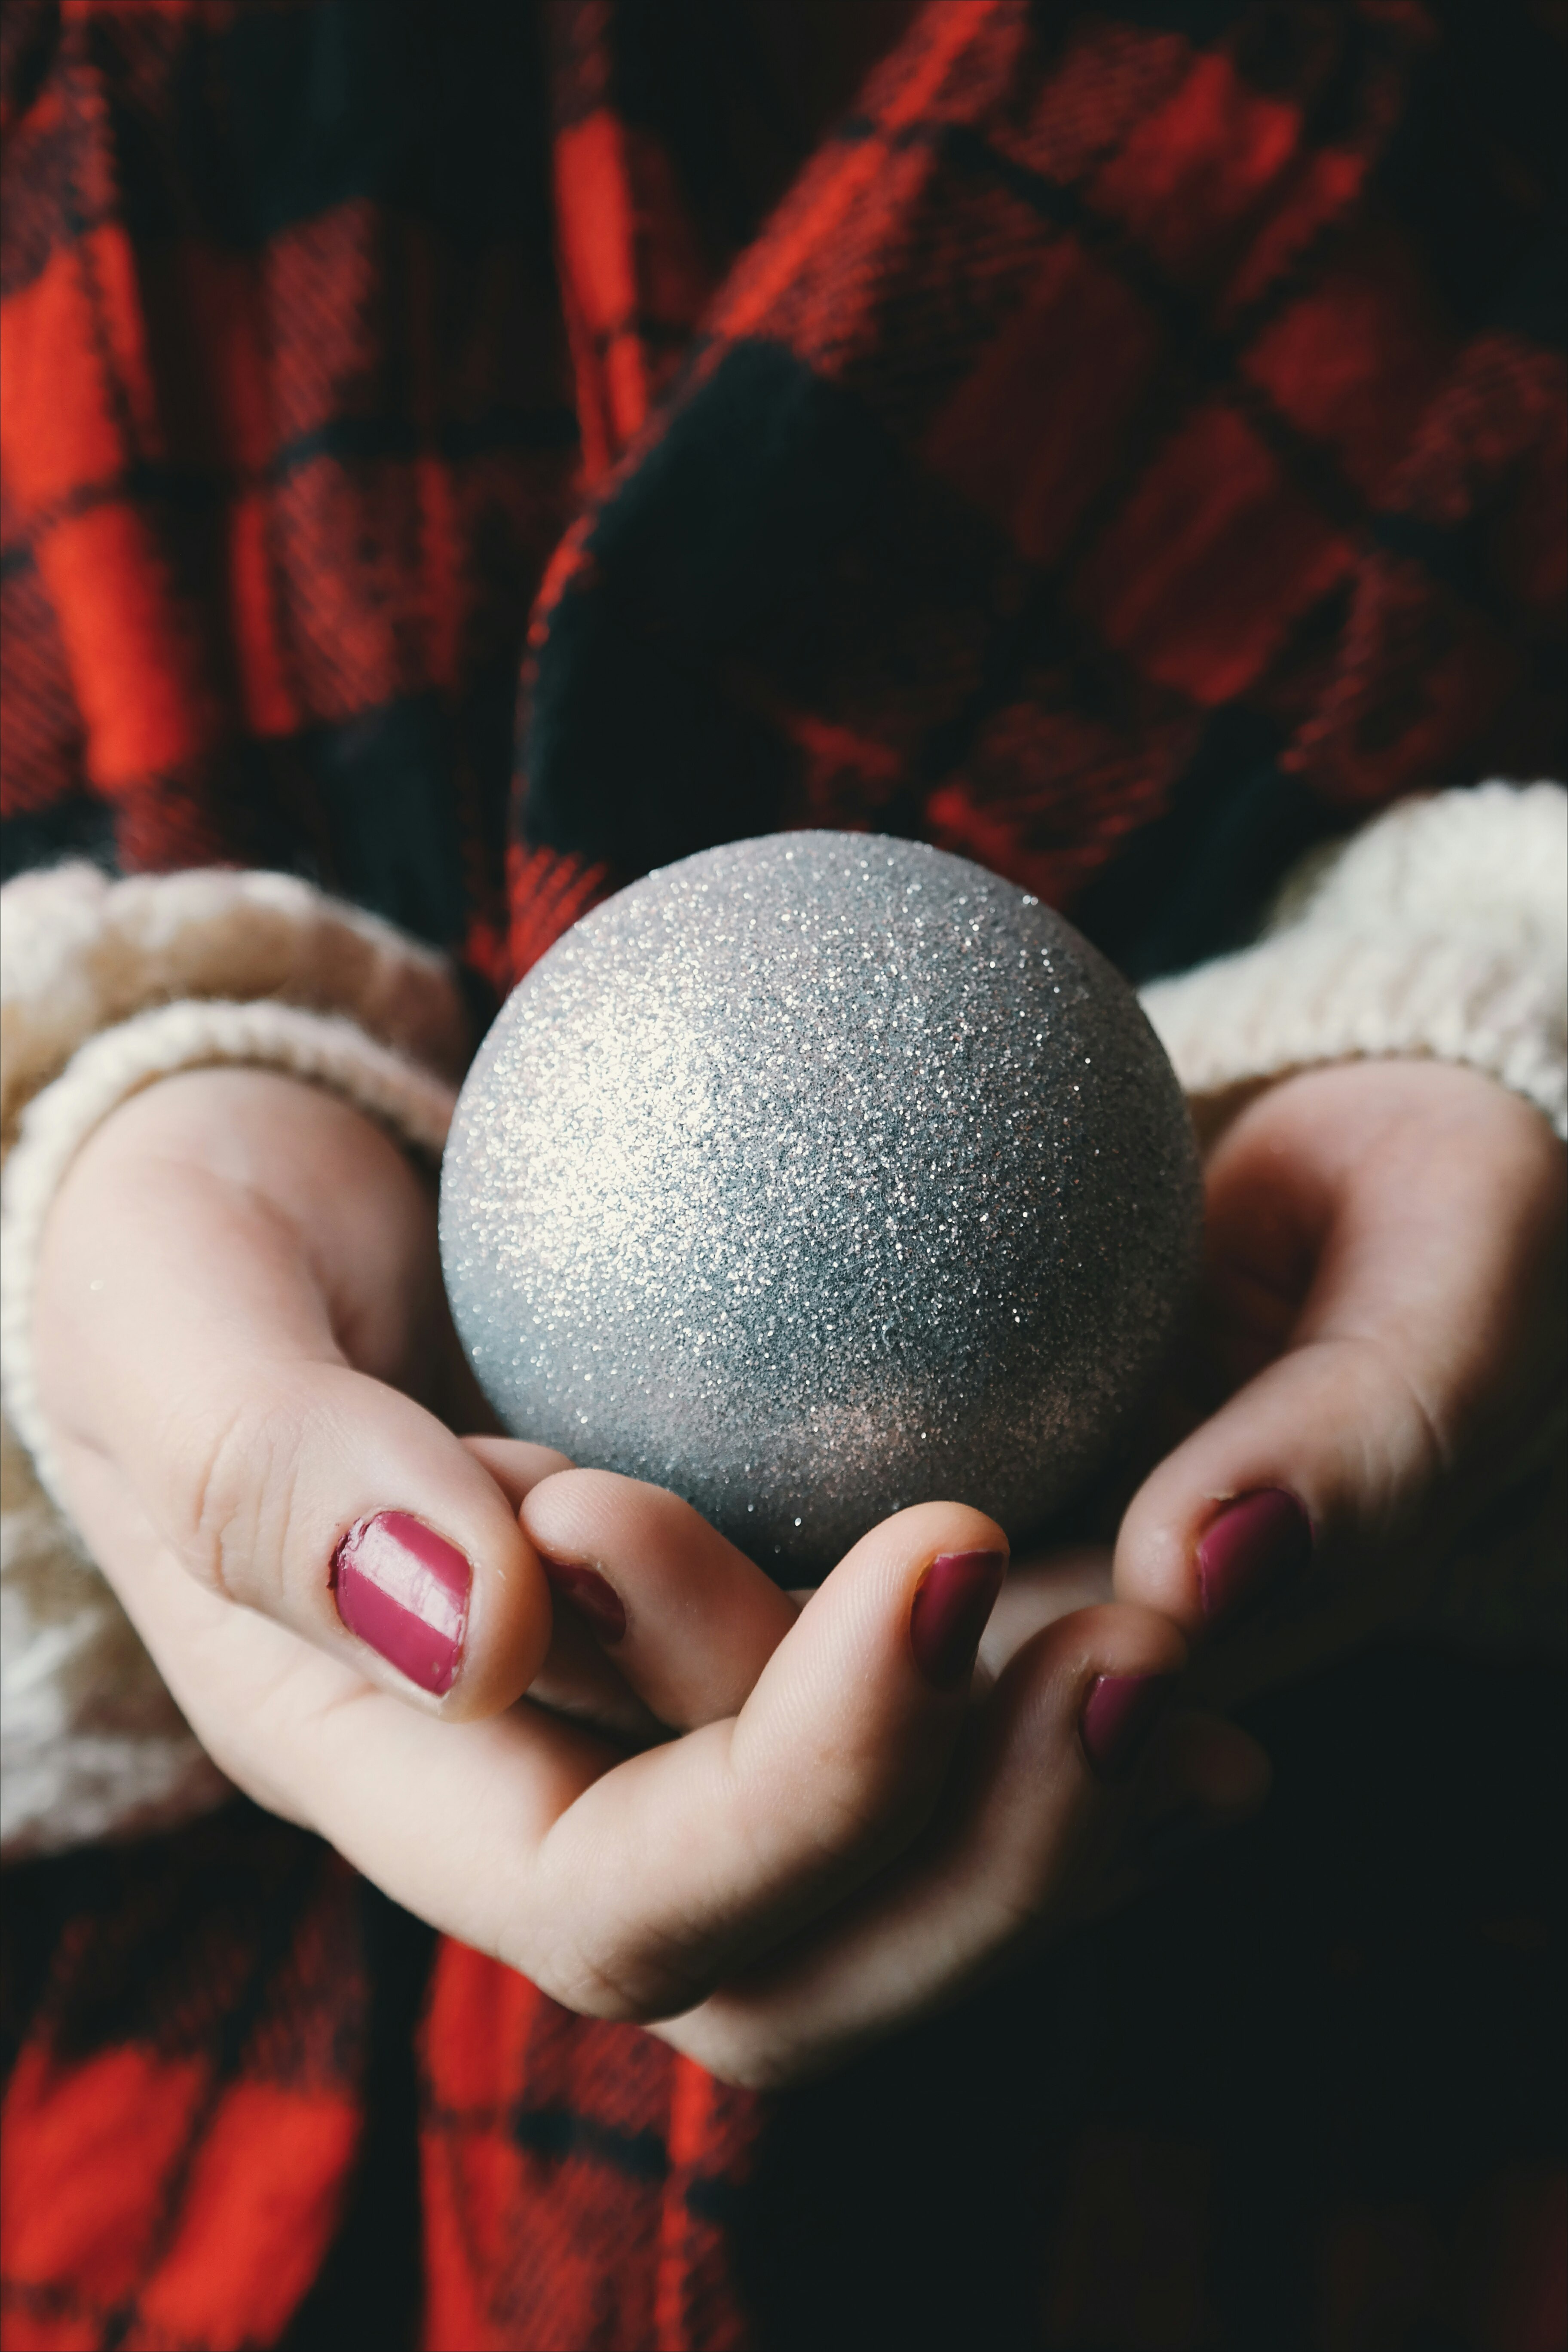 A woman with red painted nails holding a silver Christmas ornament.